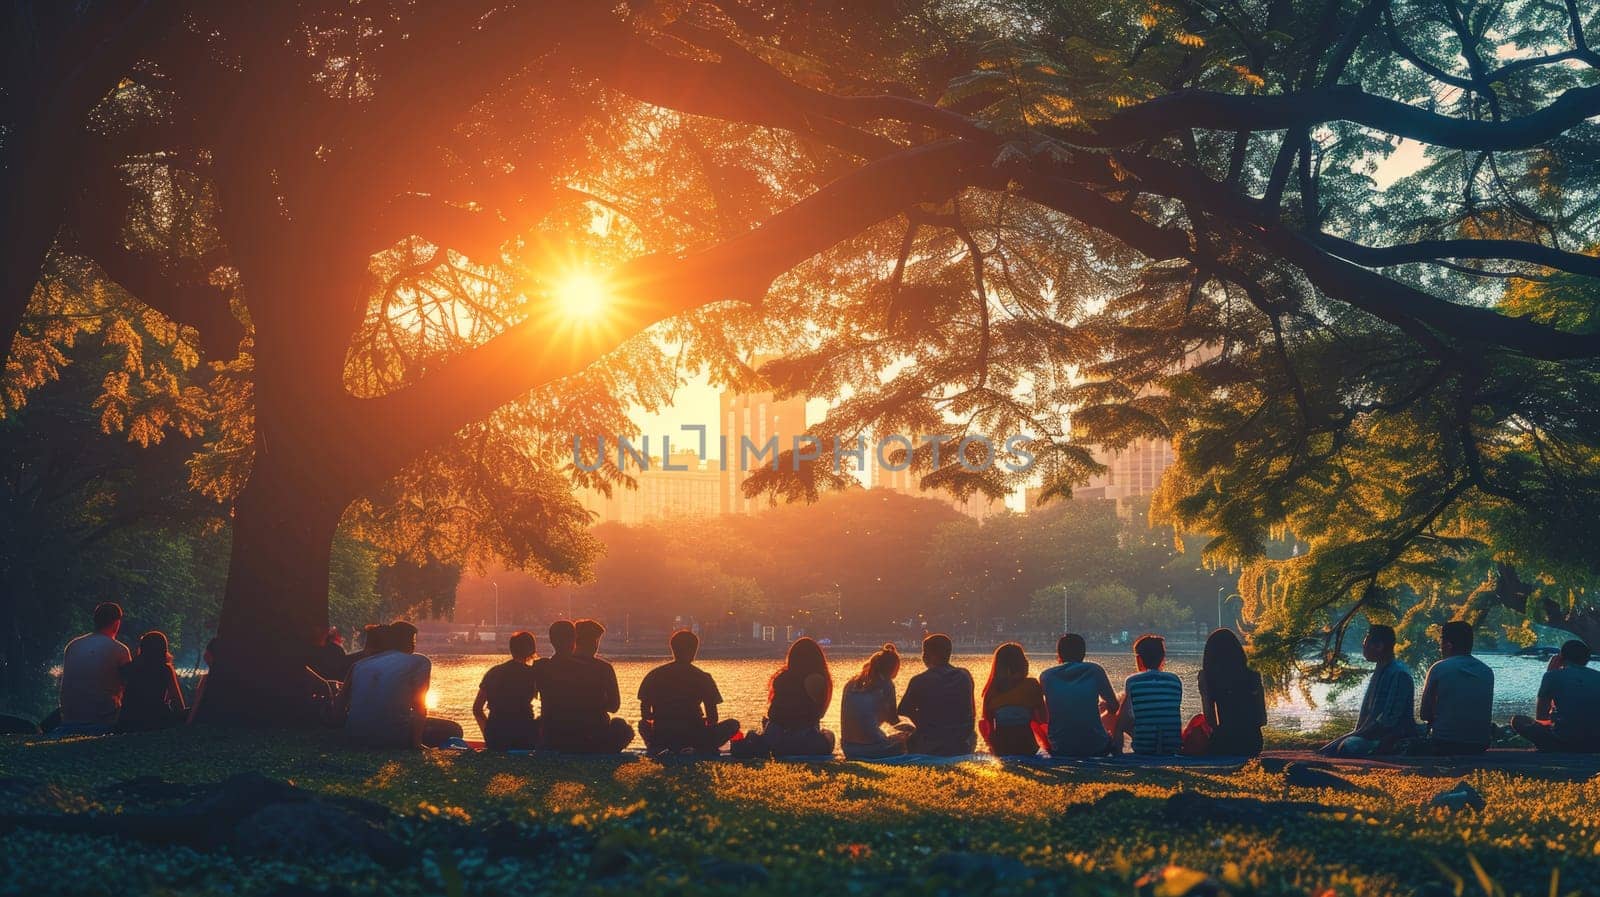 A group of people are sitting under a tree in a park. The sun is setting, casting a warm glow over the scene. The people are enjoying each other's company and the peaceful atmosphere of the park